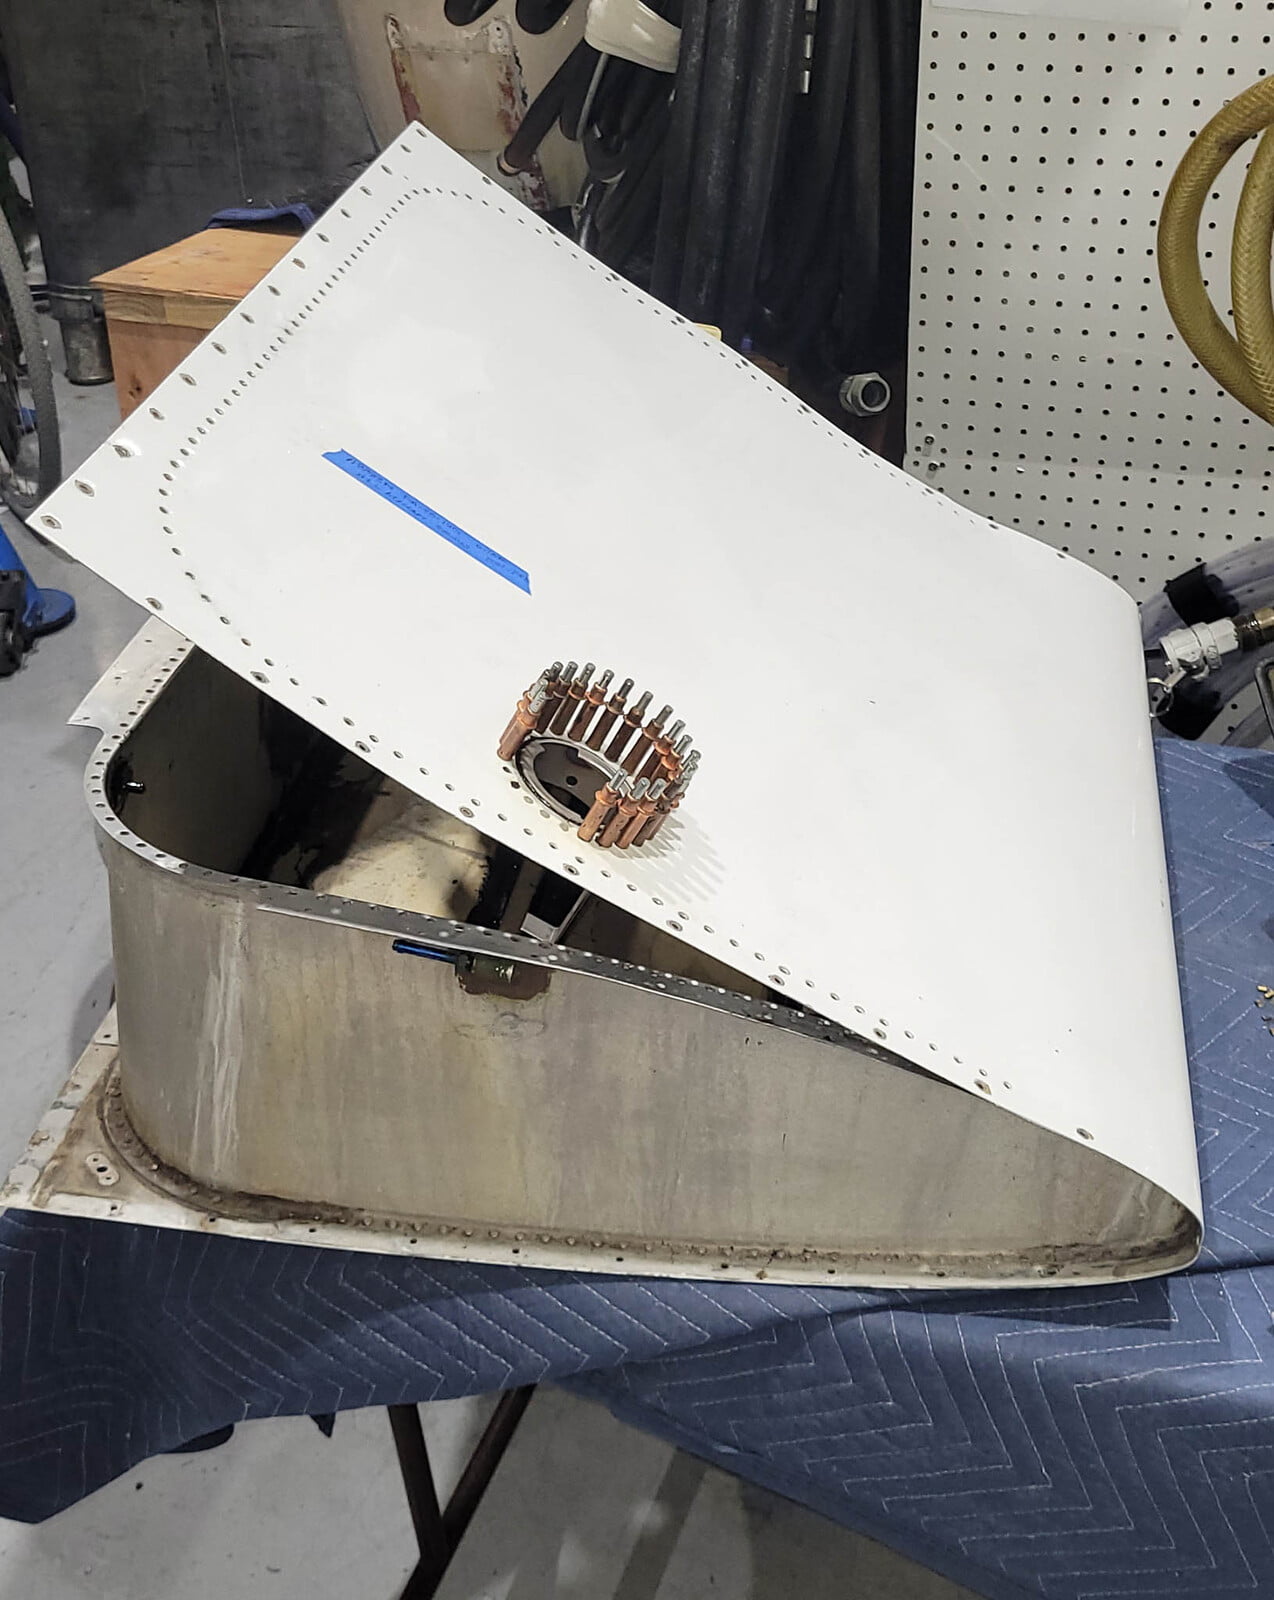 Piper Saratoga fuel tank required a filler neck replacement